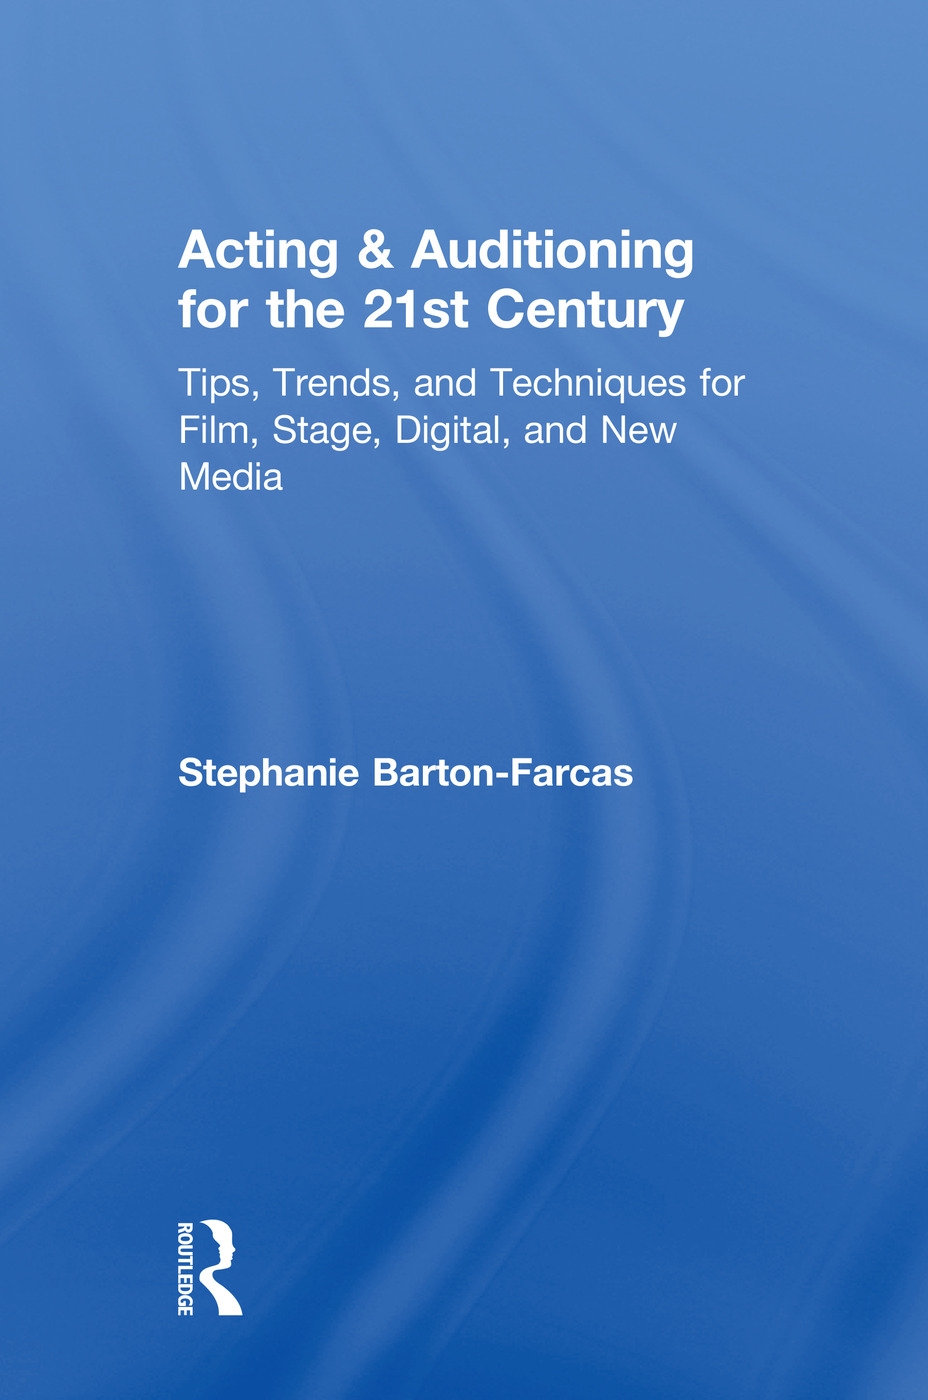 Acting & Auditioning for the 21st Century: Tips, Trends, and Techniques for Digital and New Media